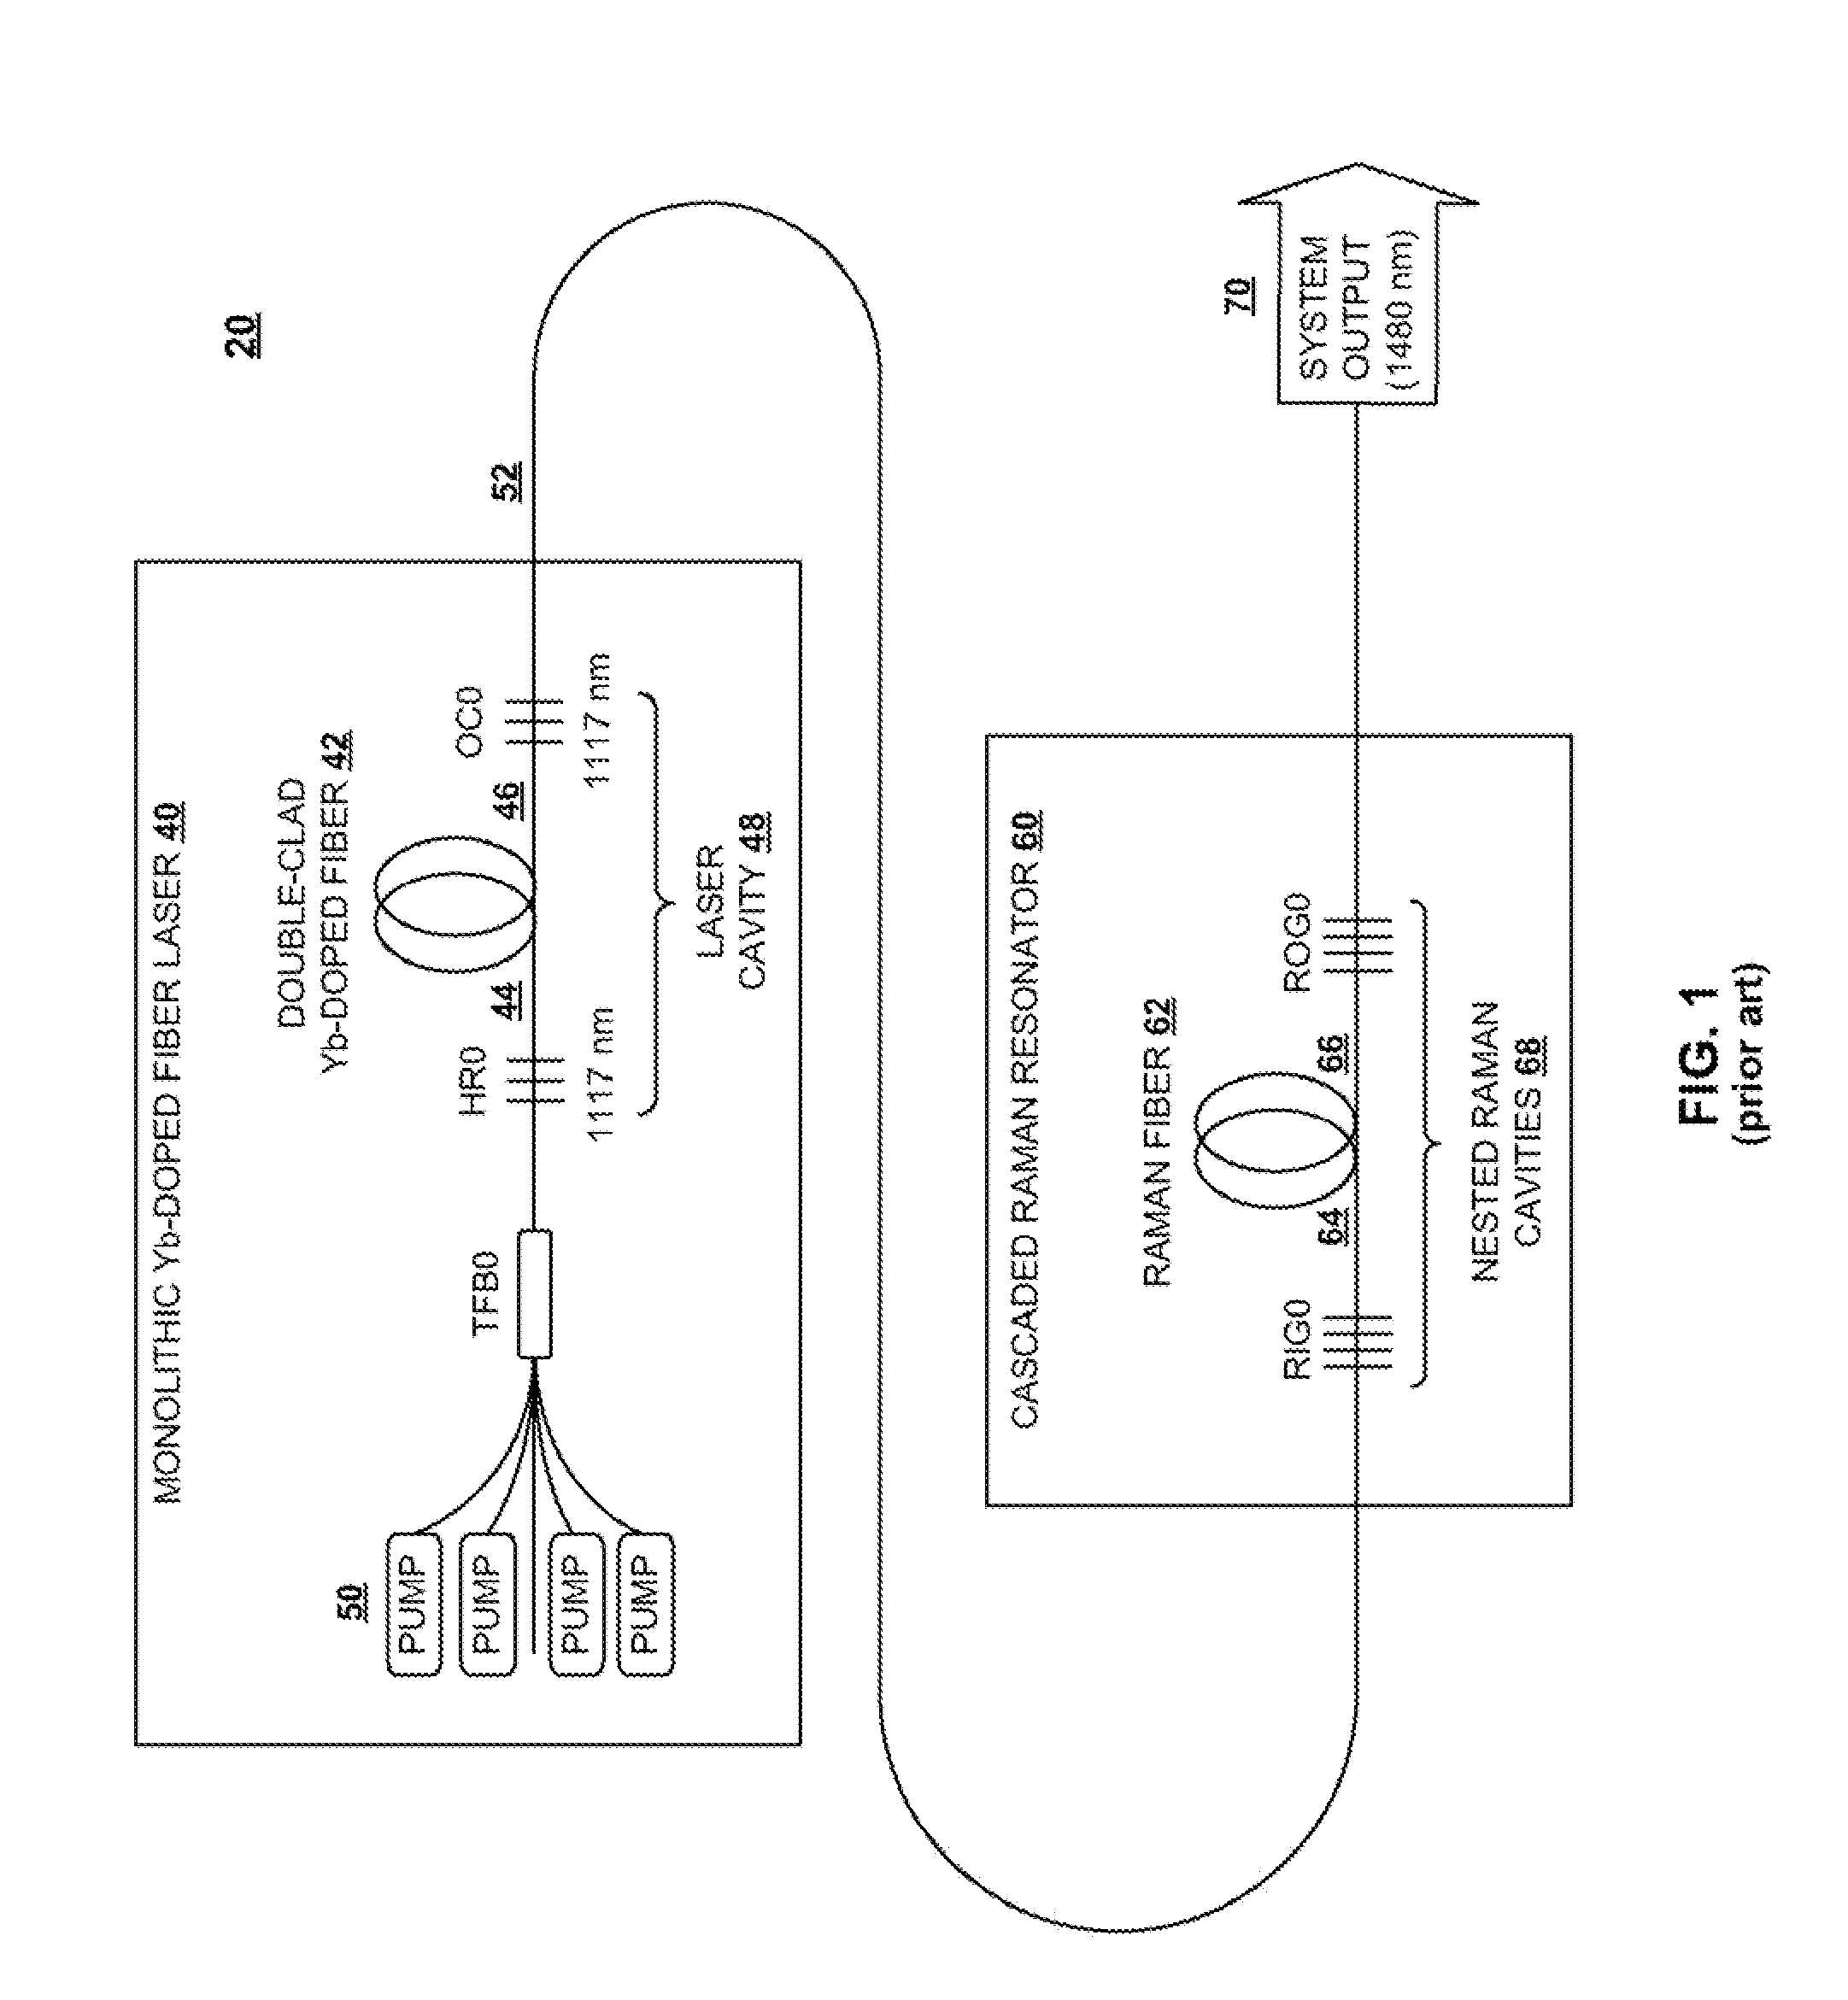 Systems and Techniques for Suppressing Backward Lasing in High-Power Cascaded Raman Fiber Lasers